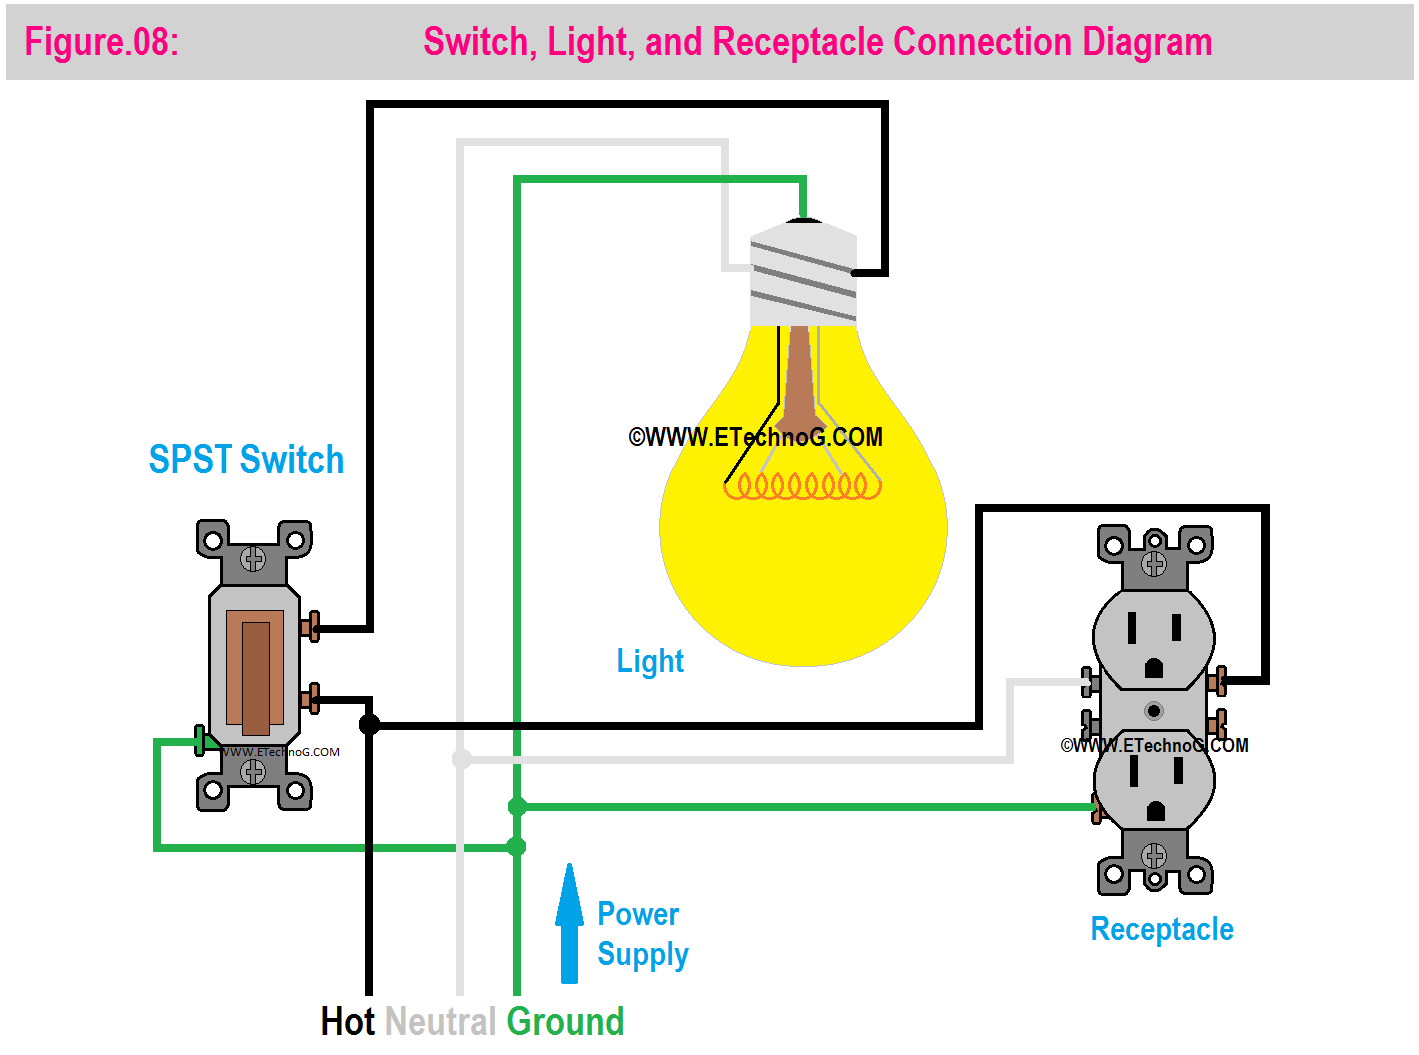 Switch, Light, and Receptacle Connection Diagram